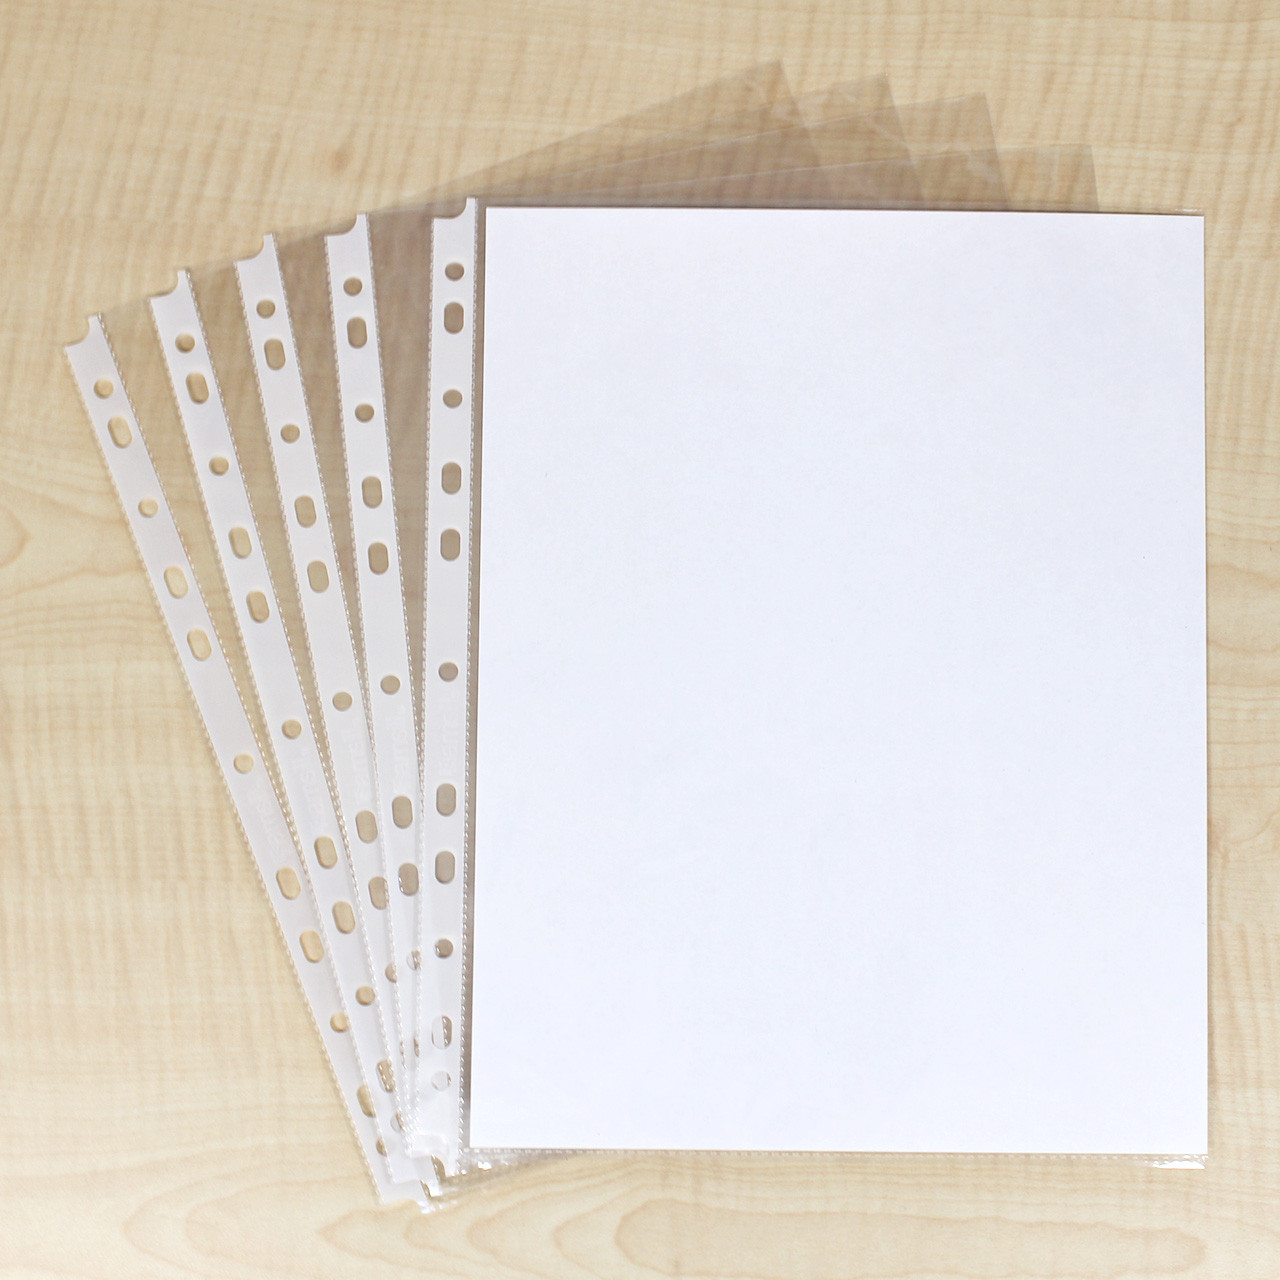 Basics Clear Sheet Protector for 3 Ring Binder, 8.5 inch x 11 inch - 100-Pack